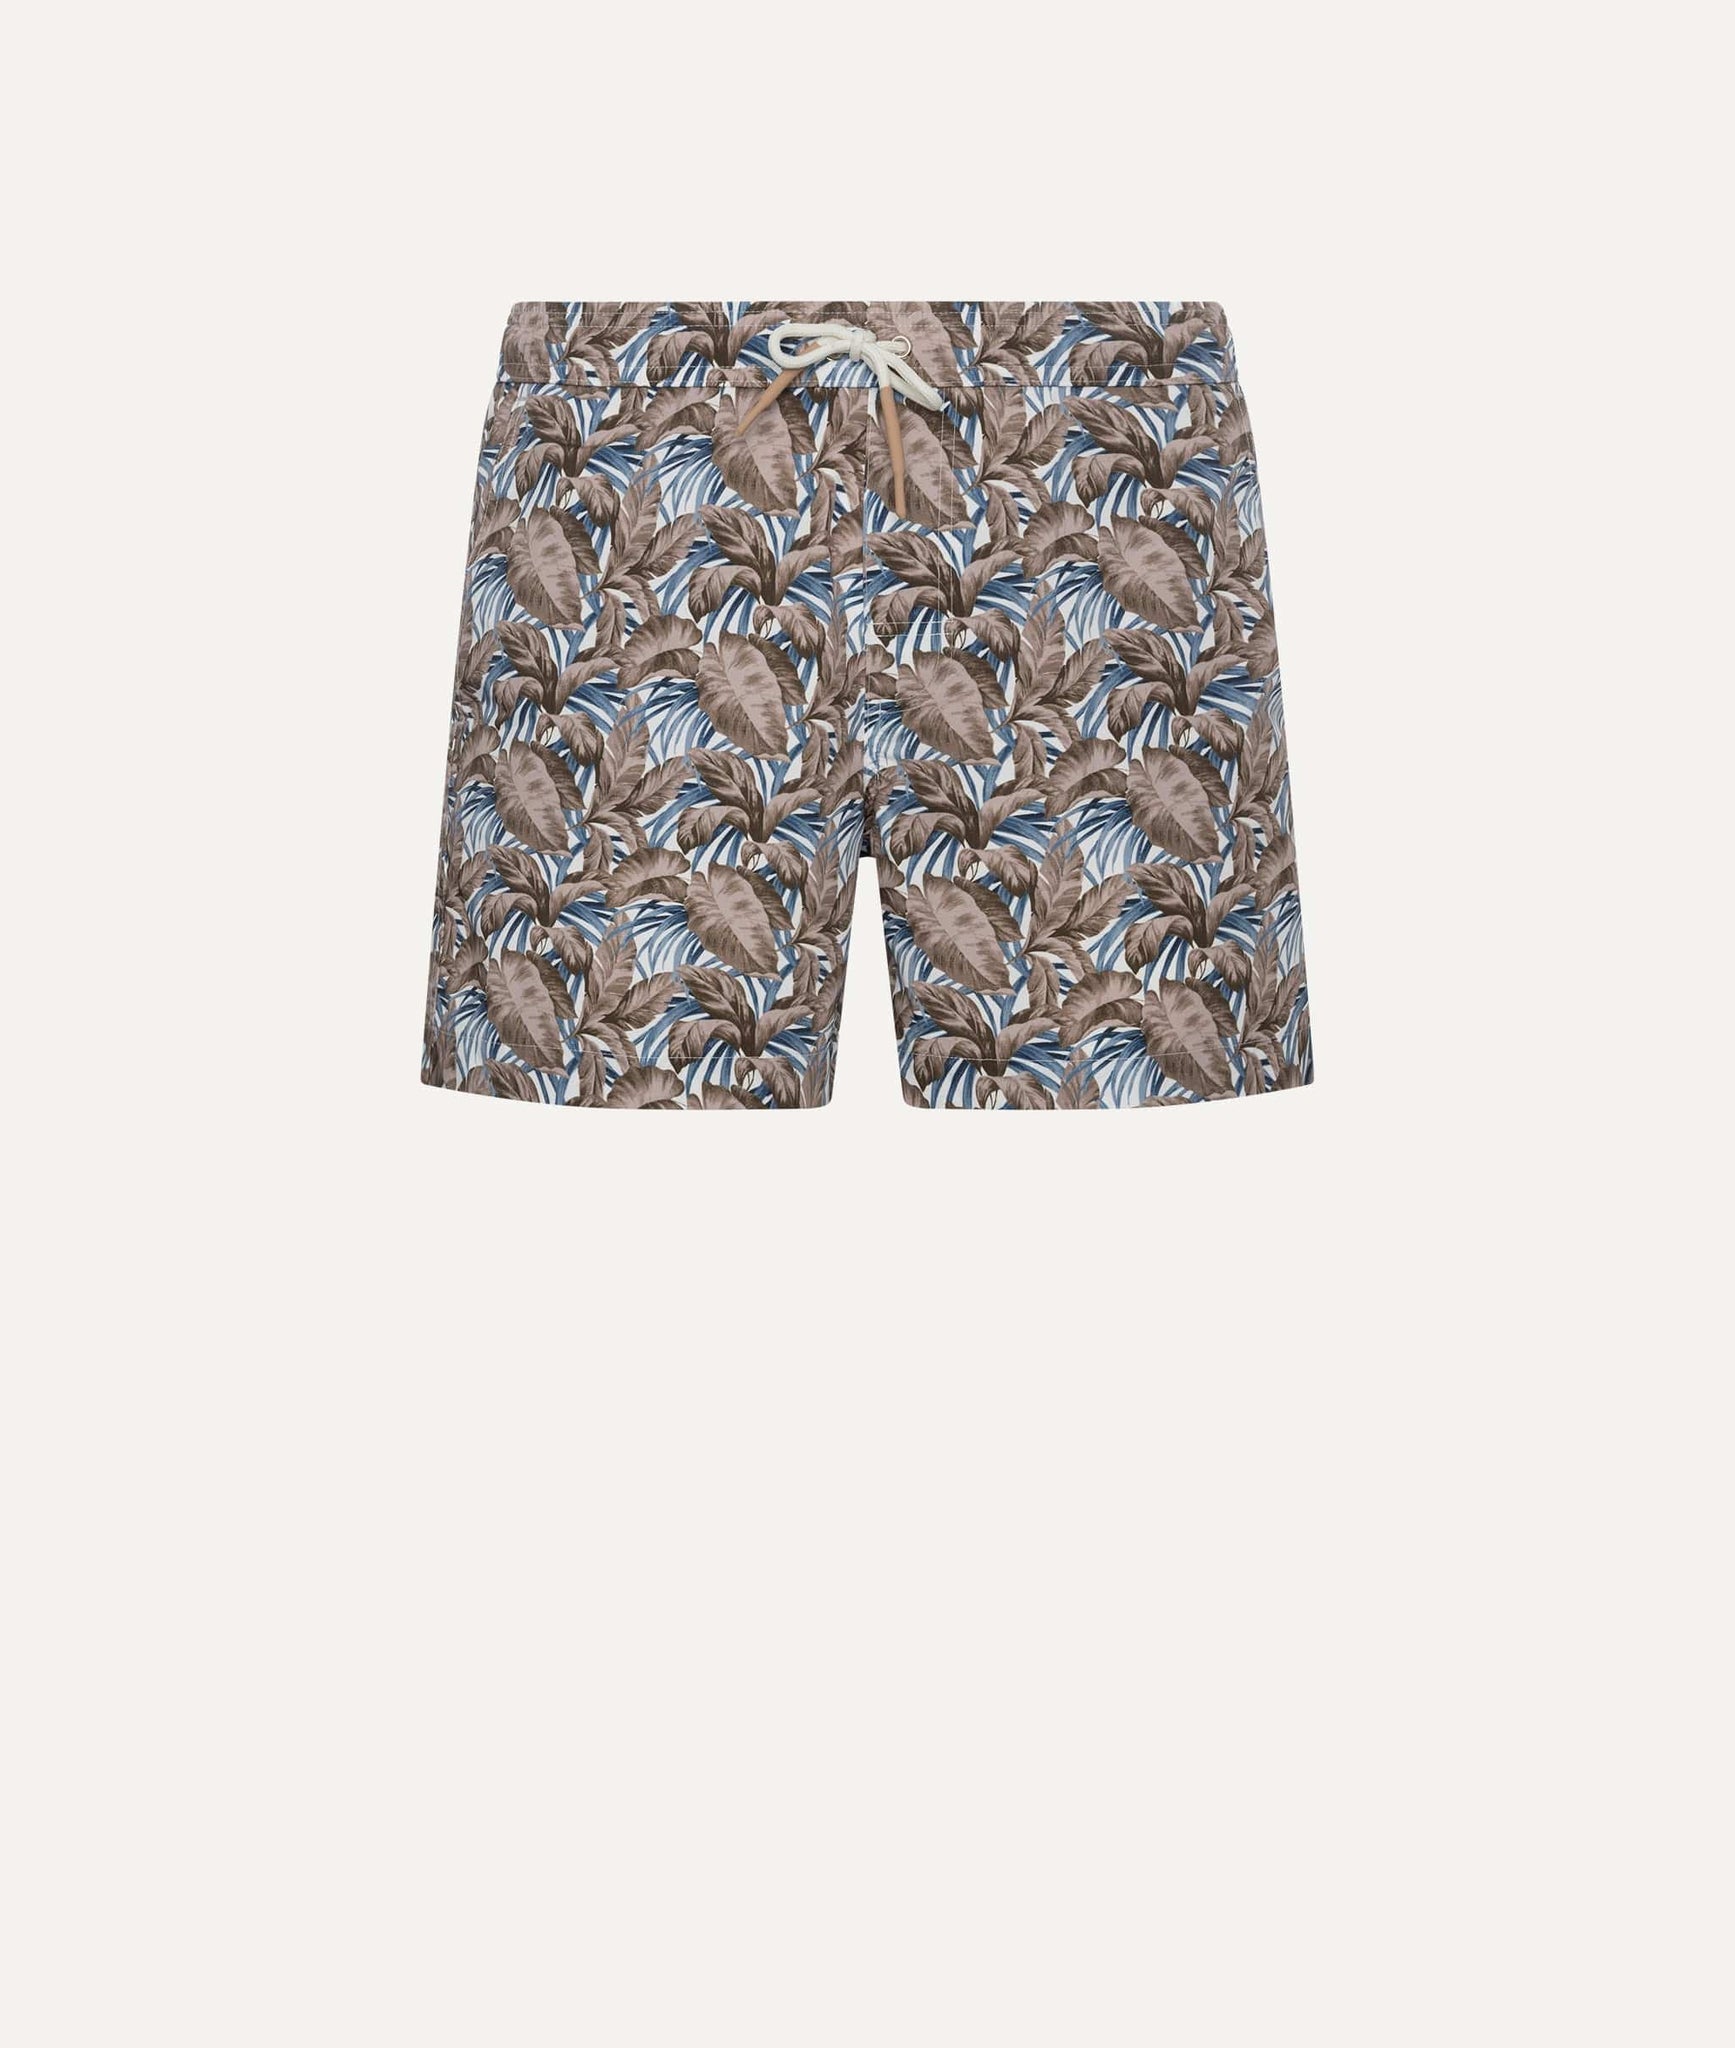 Eleventy - Swimming Suit with Leaves Pattern in Polyester